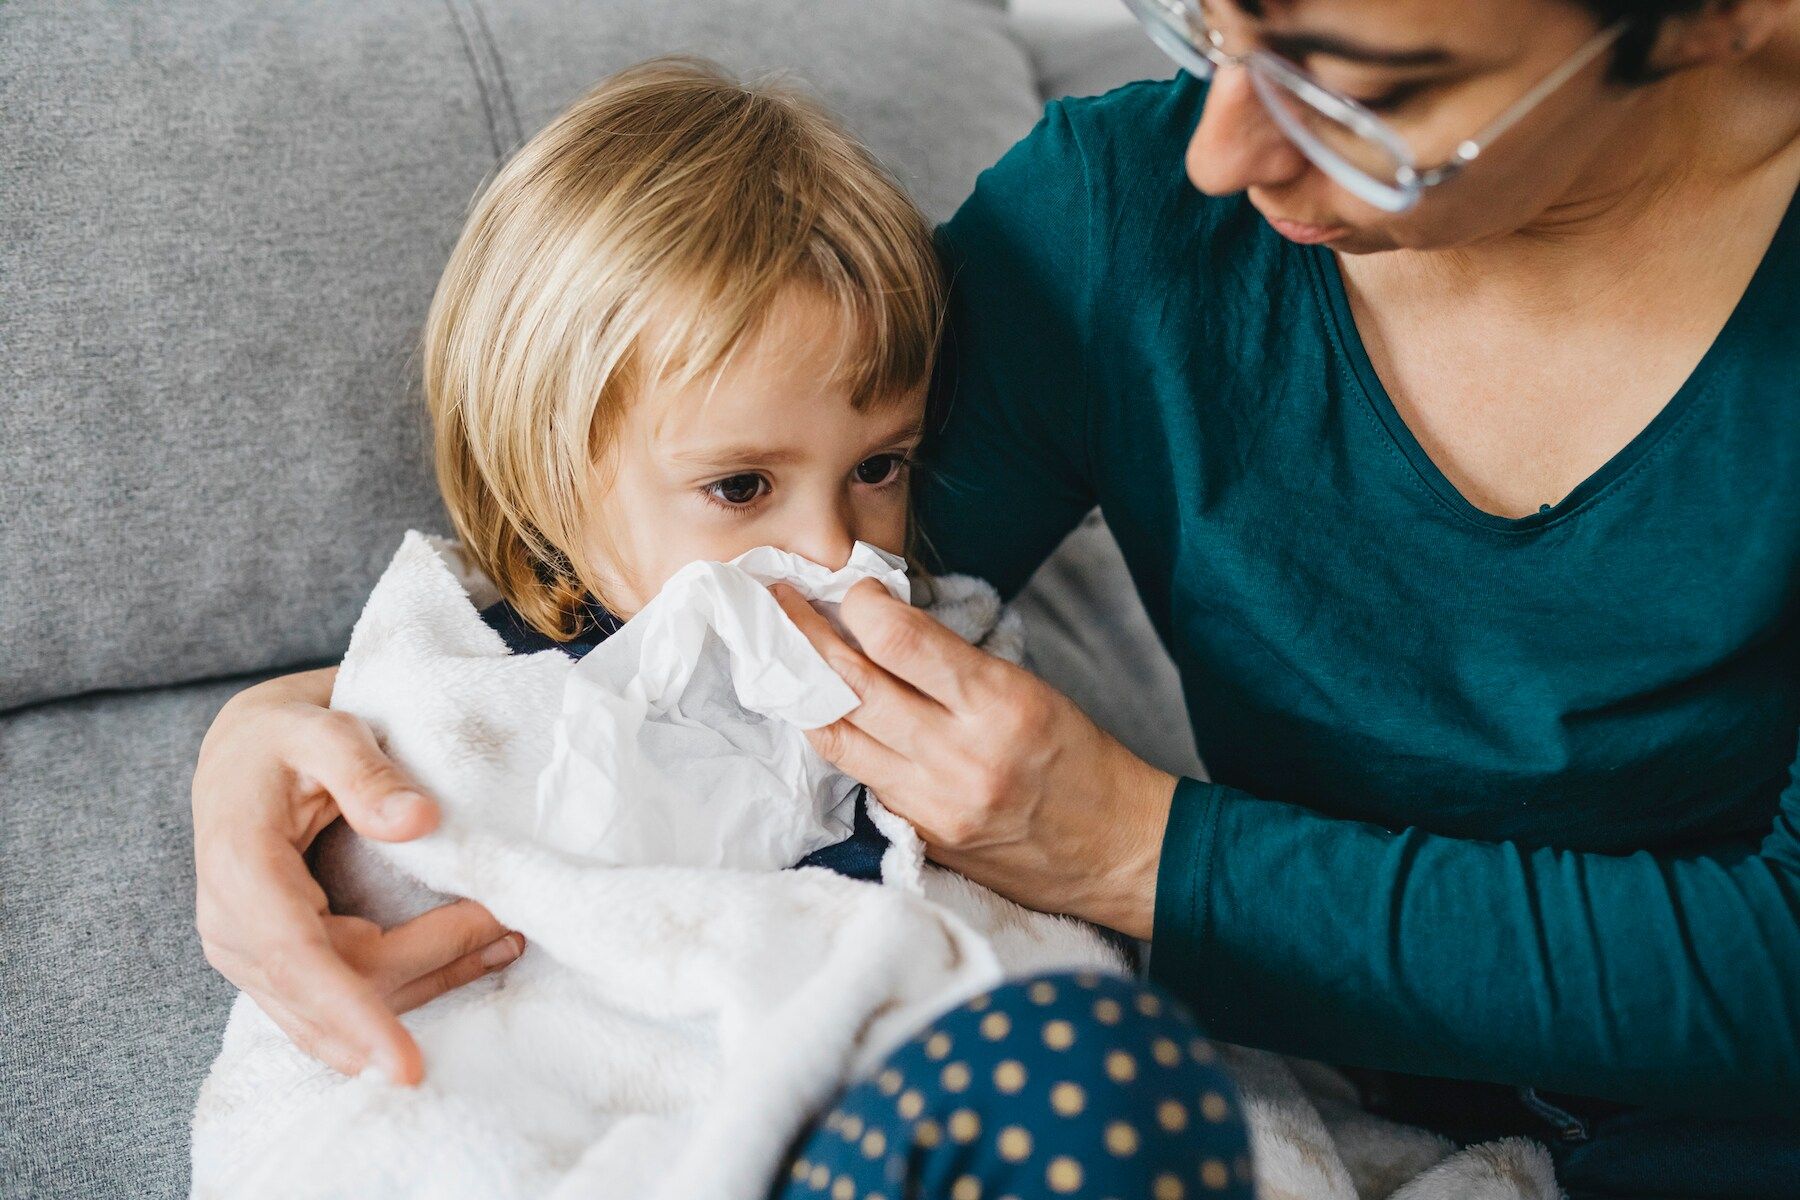 6 ways to stay healthy when caring for sick kids